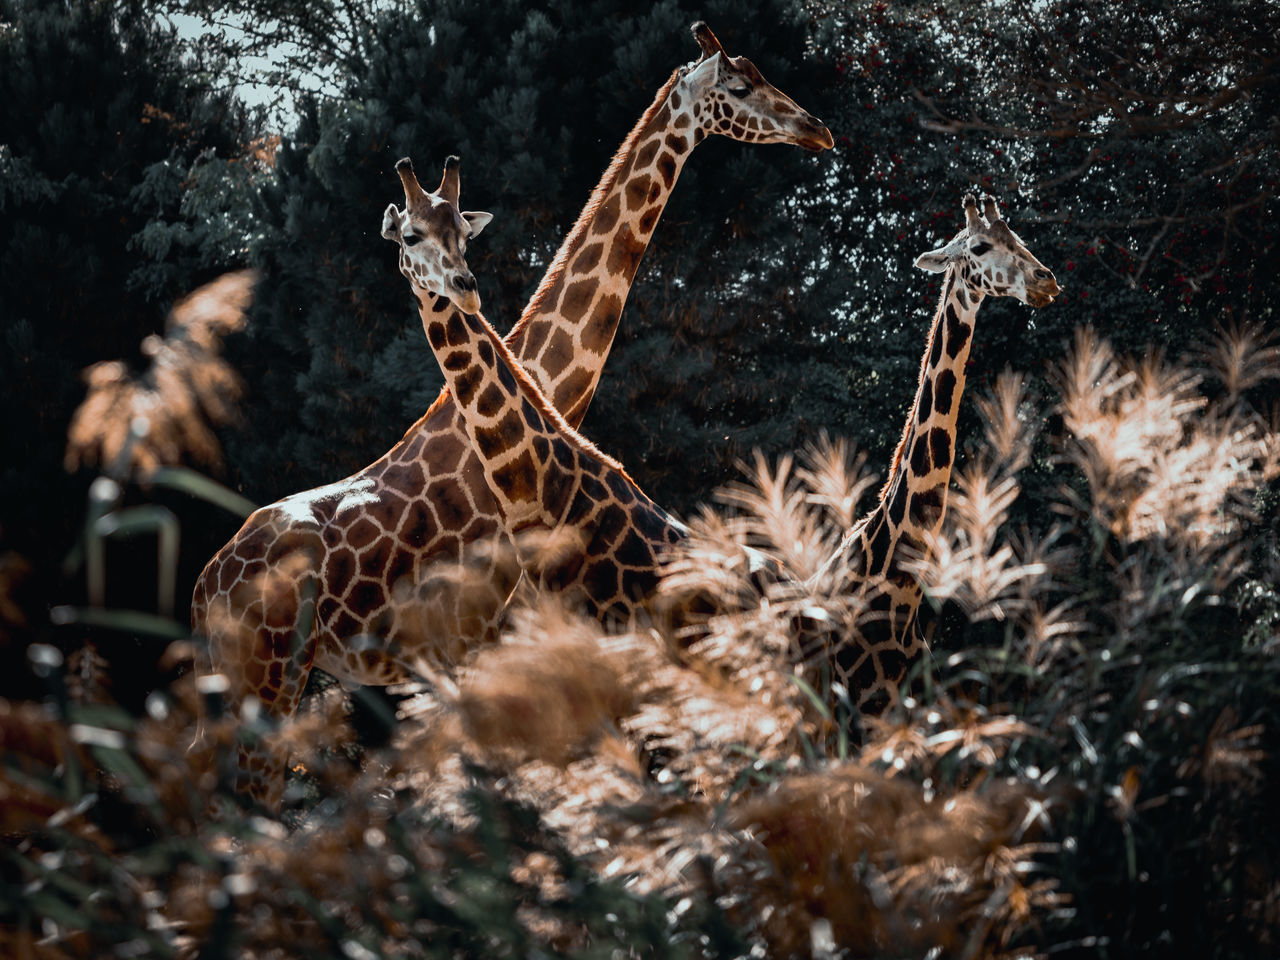 animal, animal themes, wildlife, animal wildlife, nature, mammal, no people, tree, plant, giraffe, one animal, outdoors, forest, land, day, beauty in nature